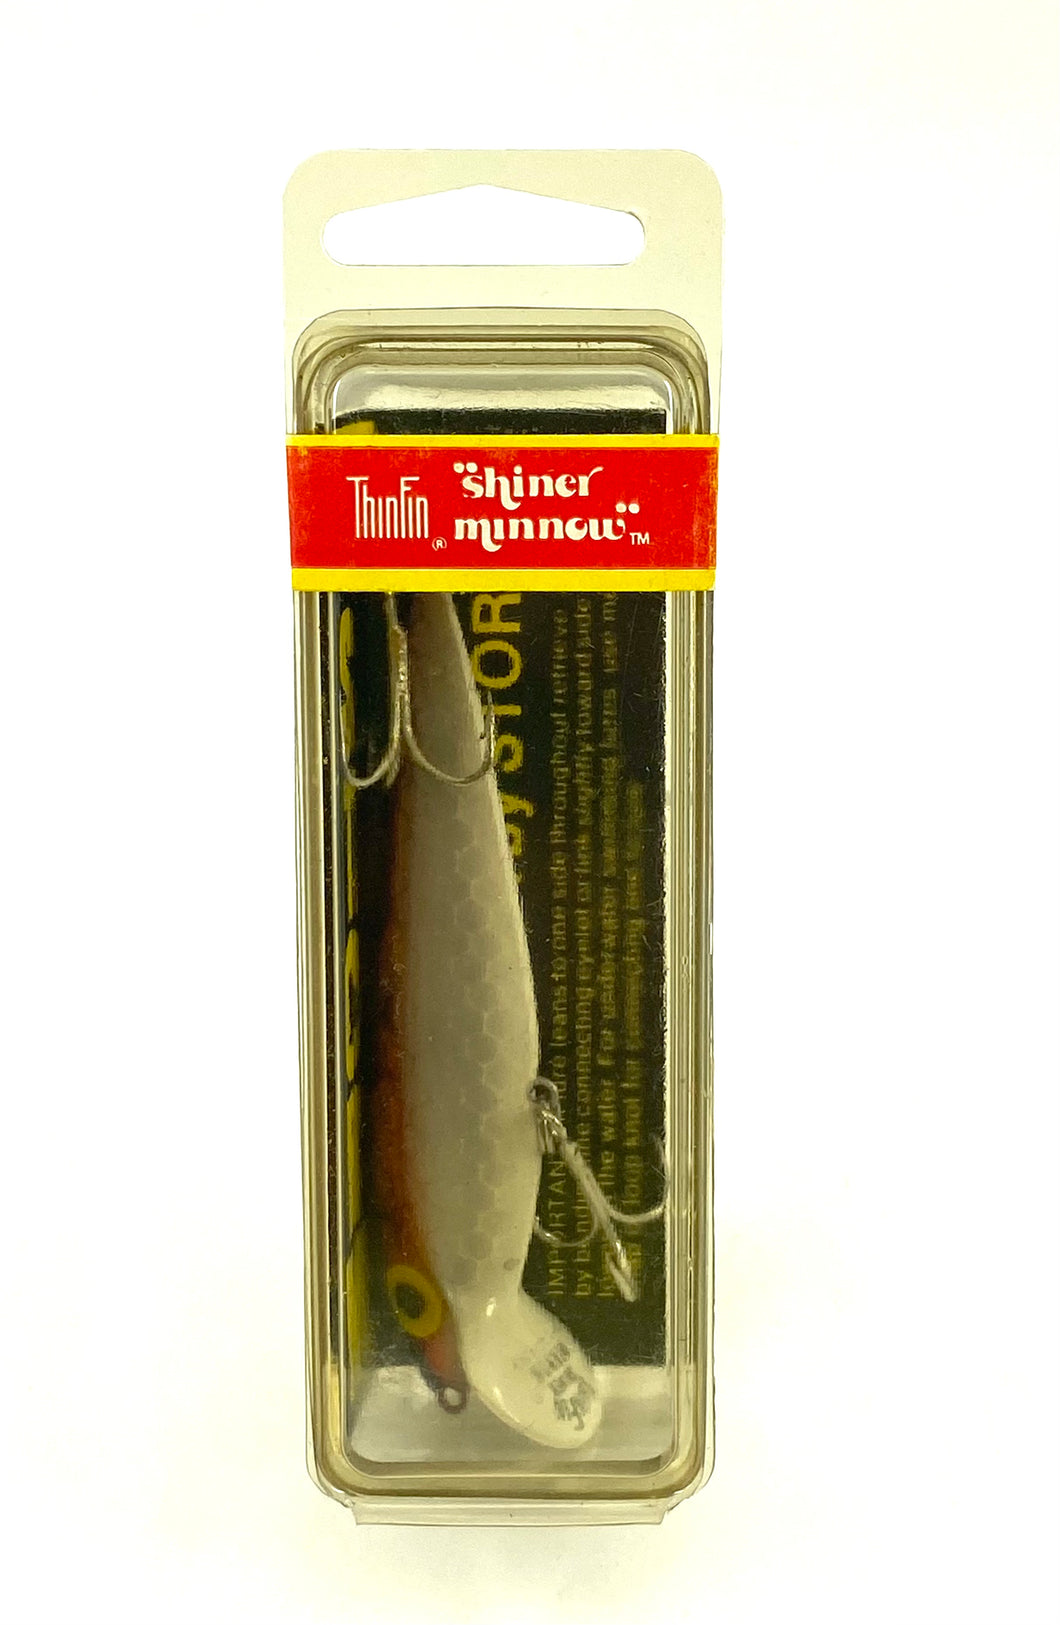 RED LABEL • STORM ThinFin AM5 SHINER MINNOW Fishing Lure • RED